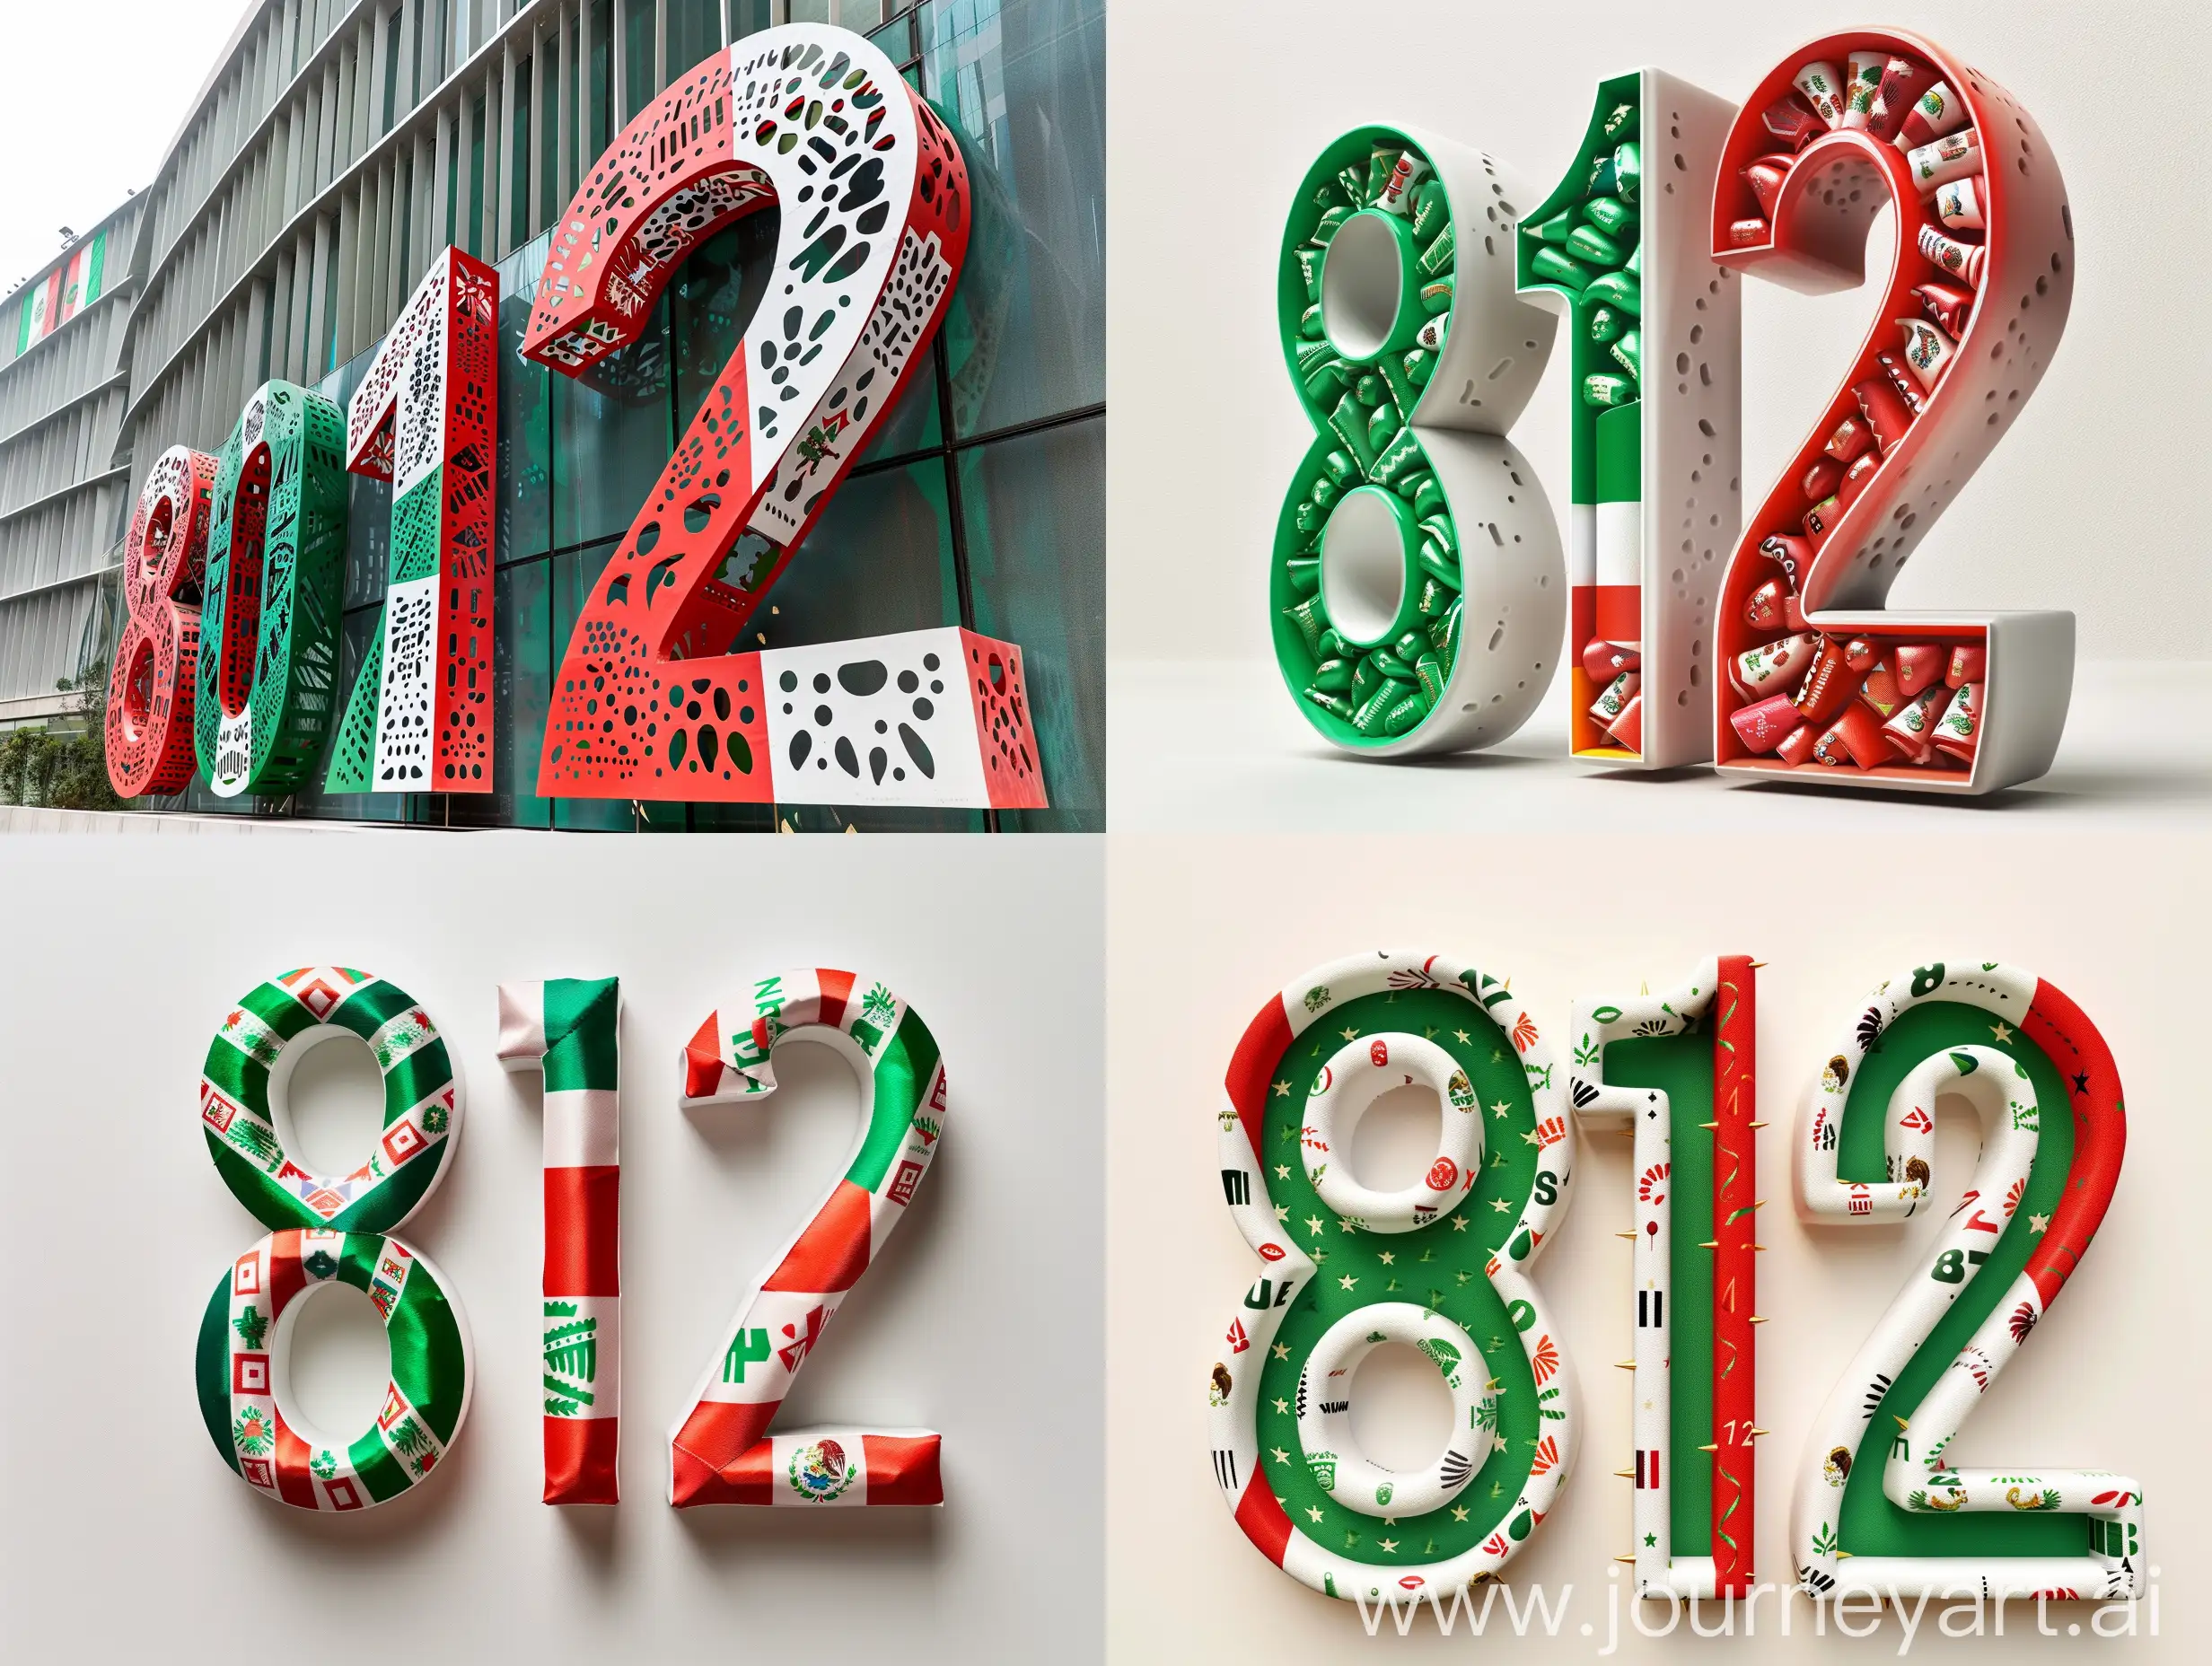 Mexican-Flags-Decorated-with-Number-812-Vibrant-Cultural-Celebration